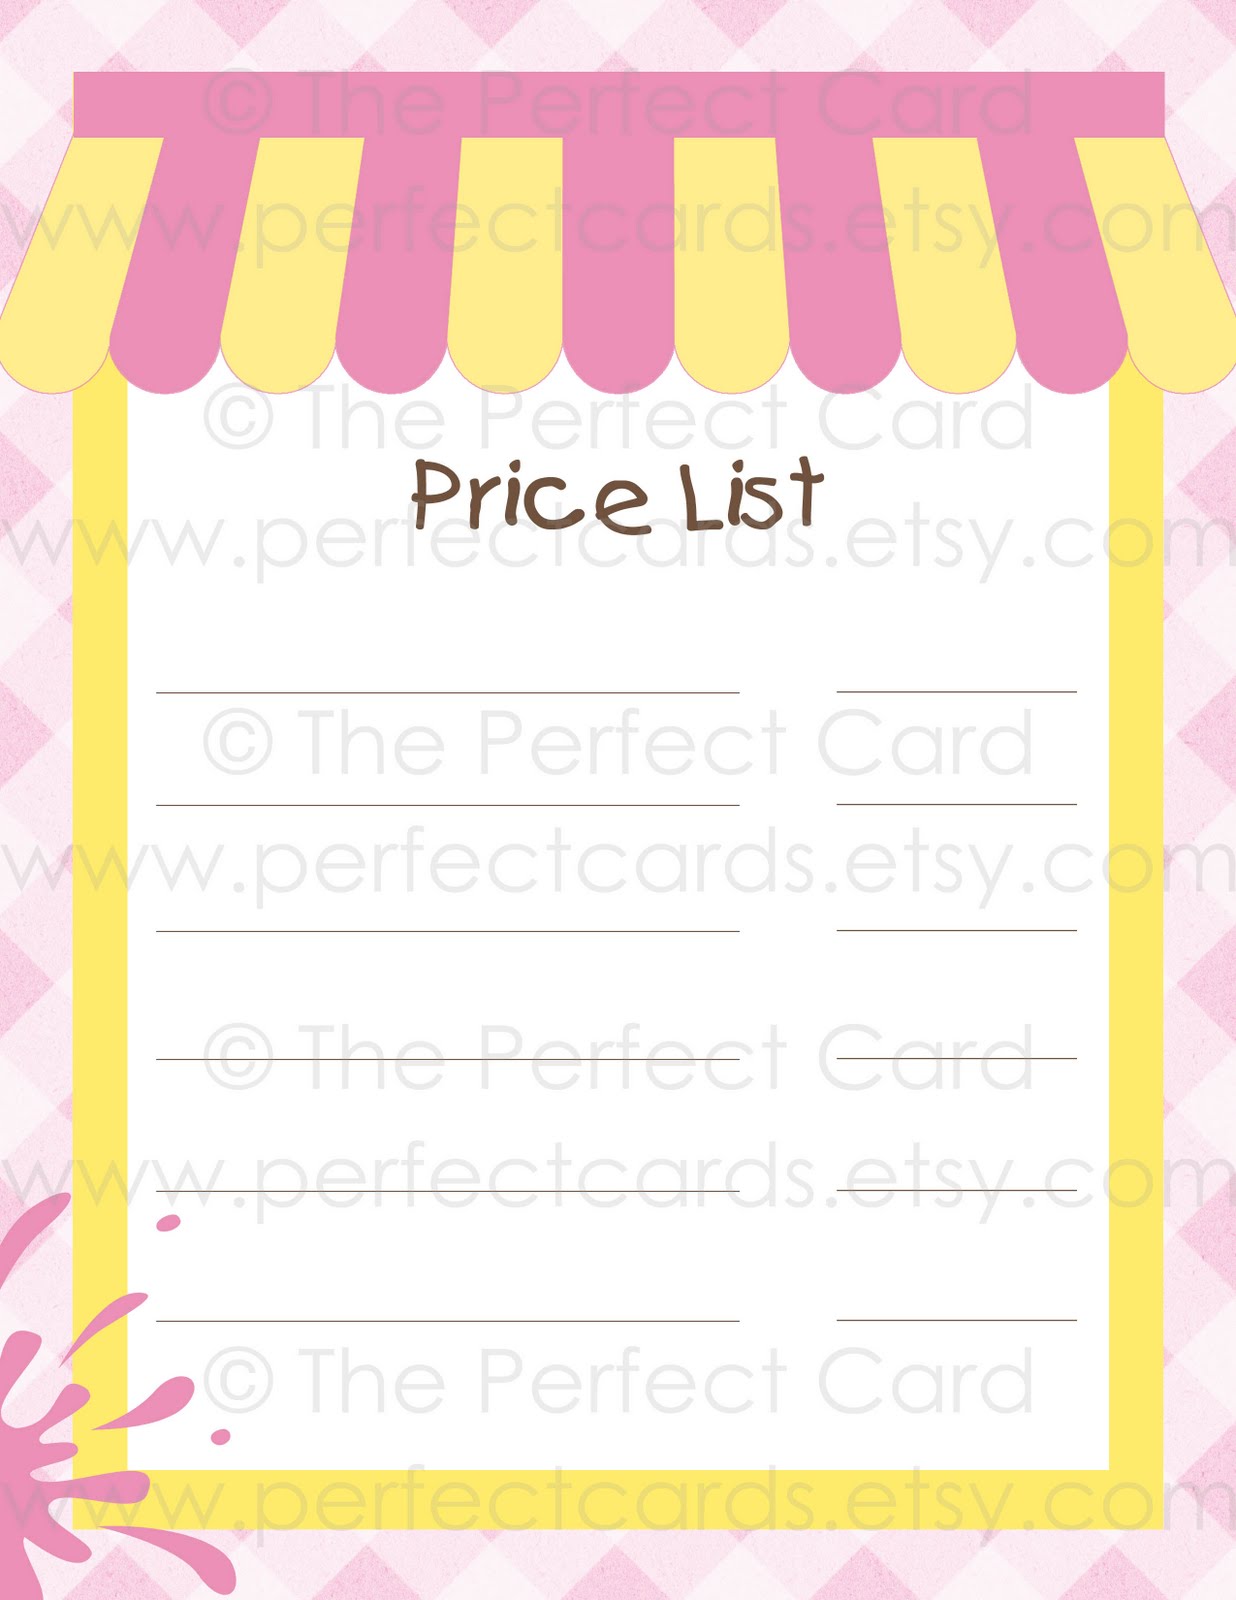 the-perfect-card-lemonade-stand-printable-set-giveaway